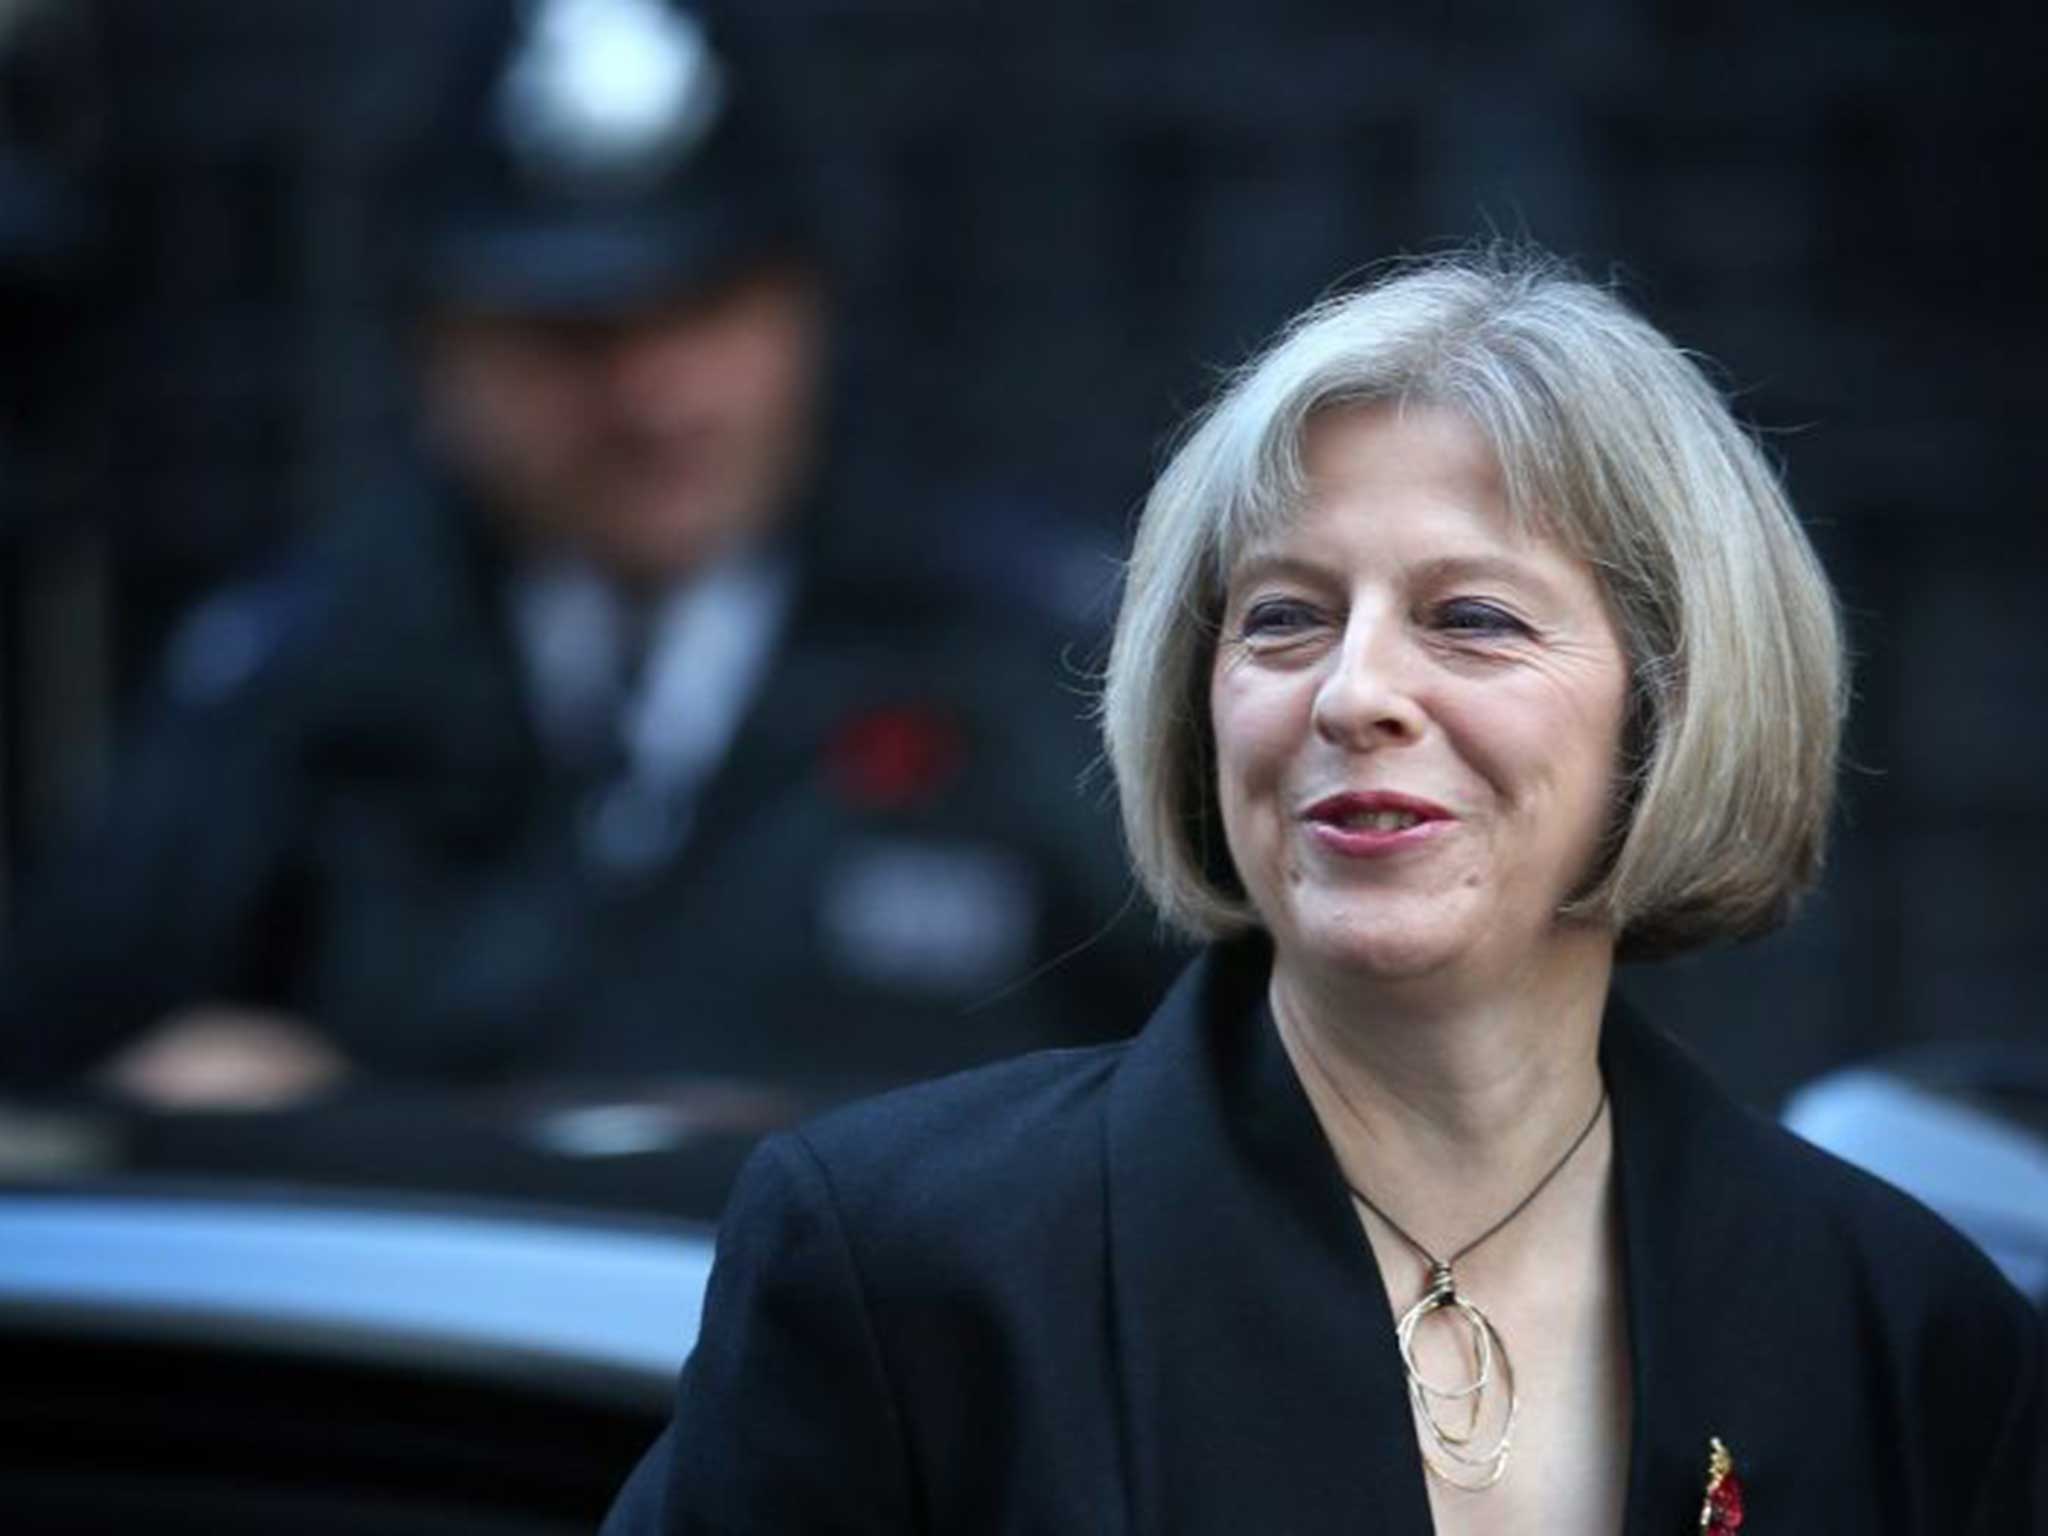 Downing Street believes Ms May has explicitly approved the actions of her advisers Nick Timothy and Stephen Parkinson